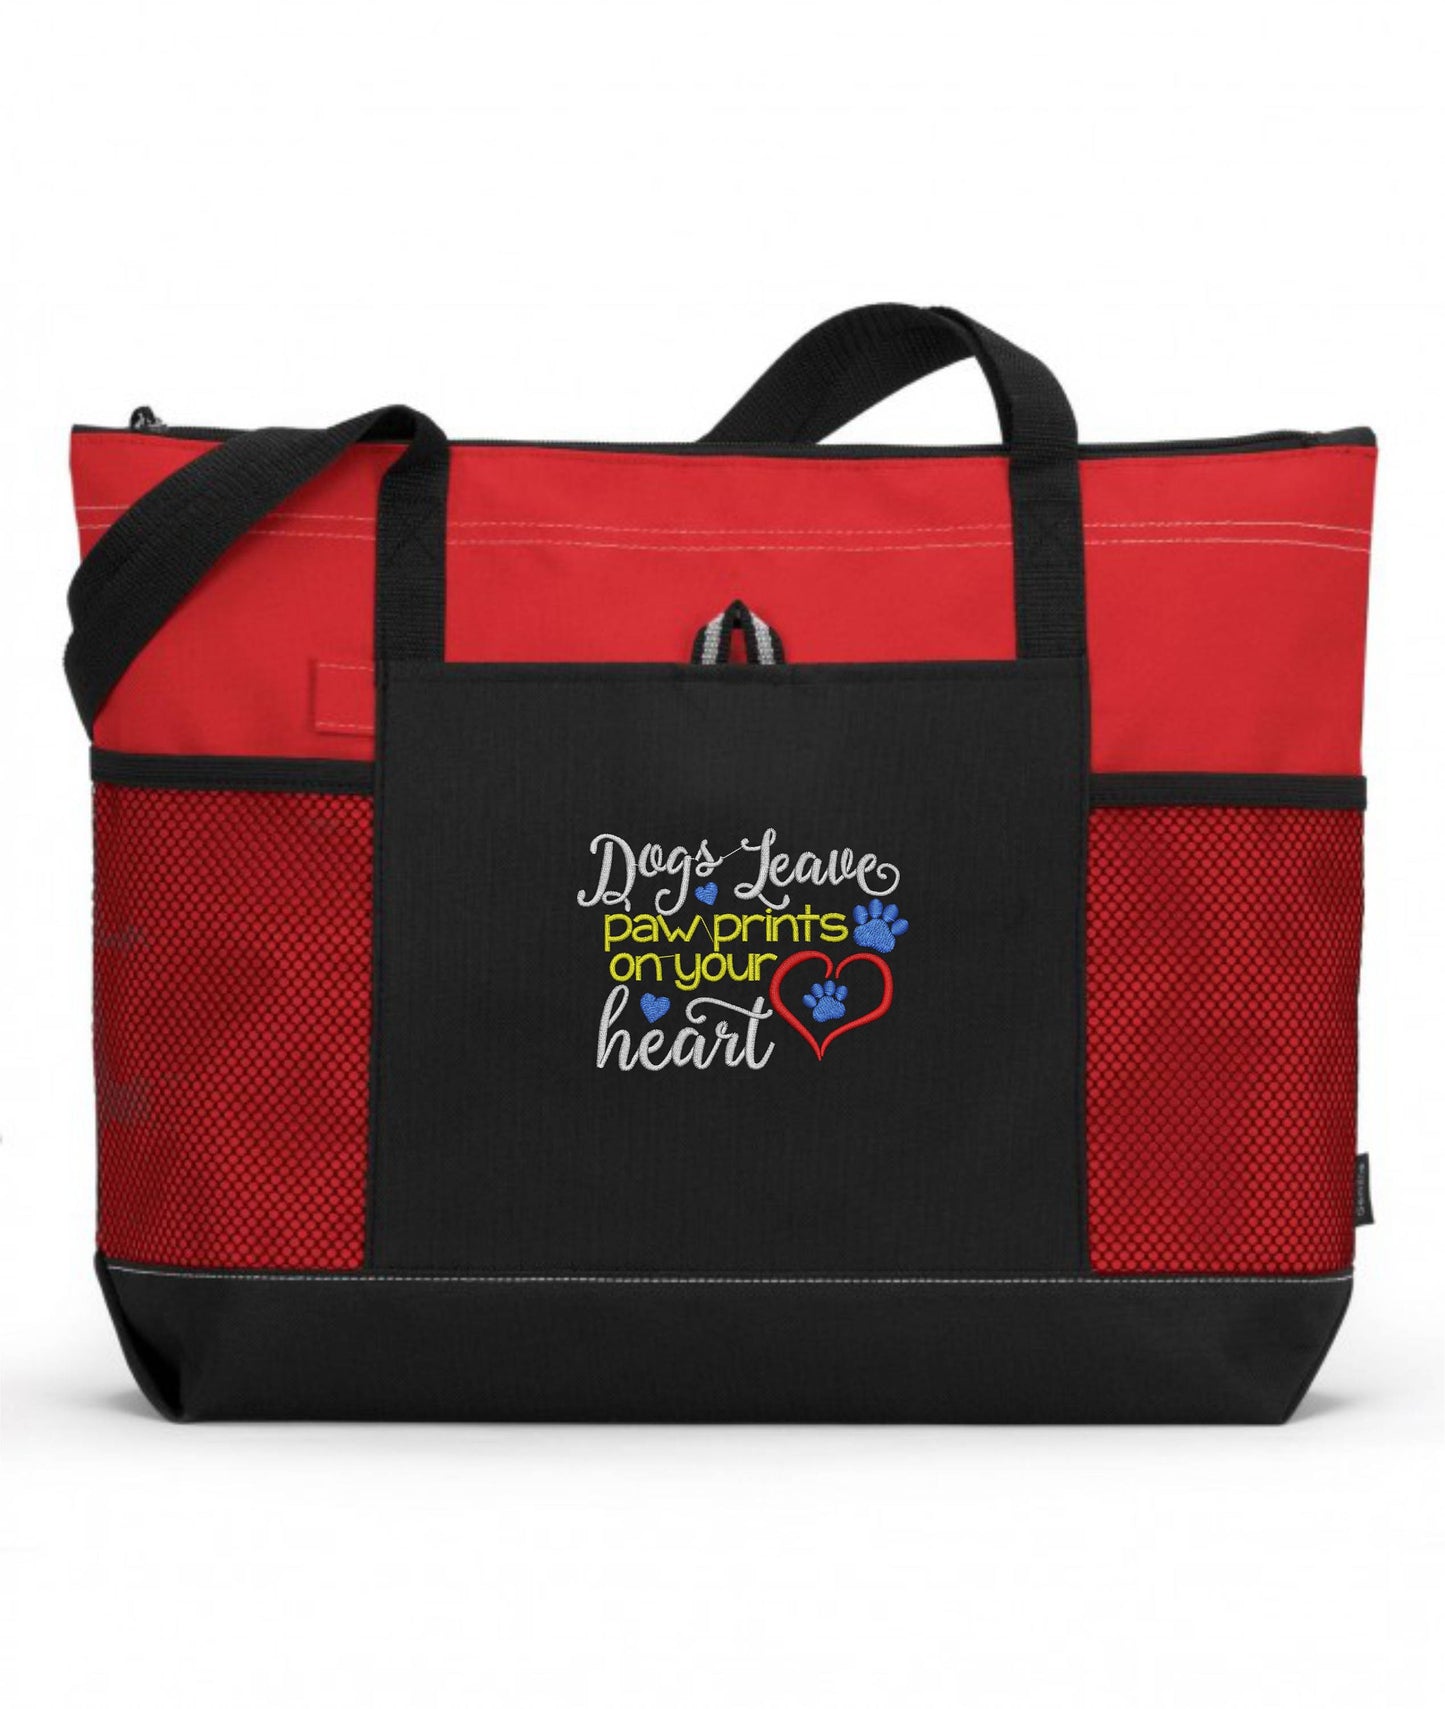 Dogs Leave Paw Prints On Your Heart Embroidered Dog Tote Bag